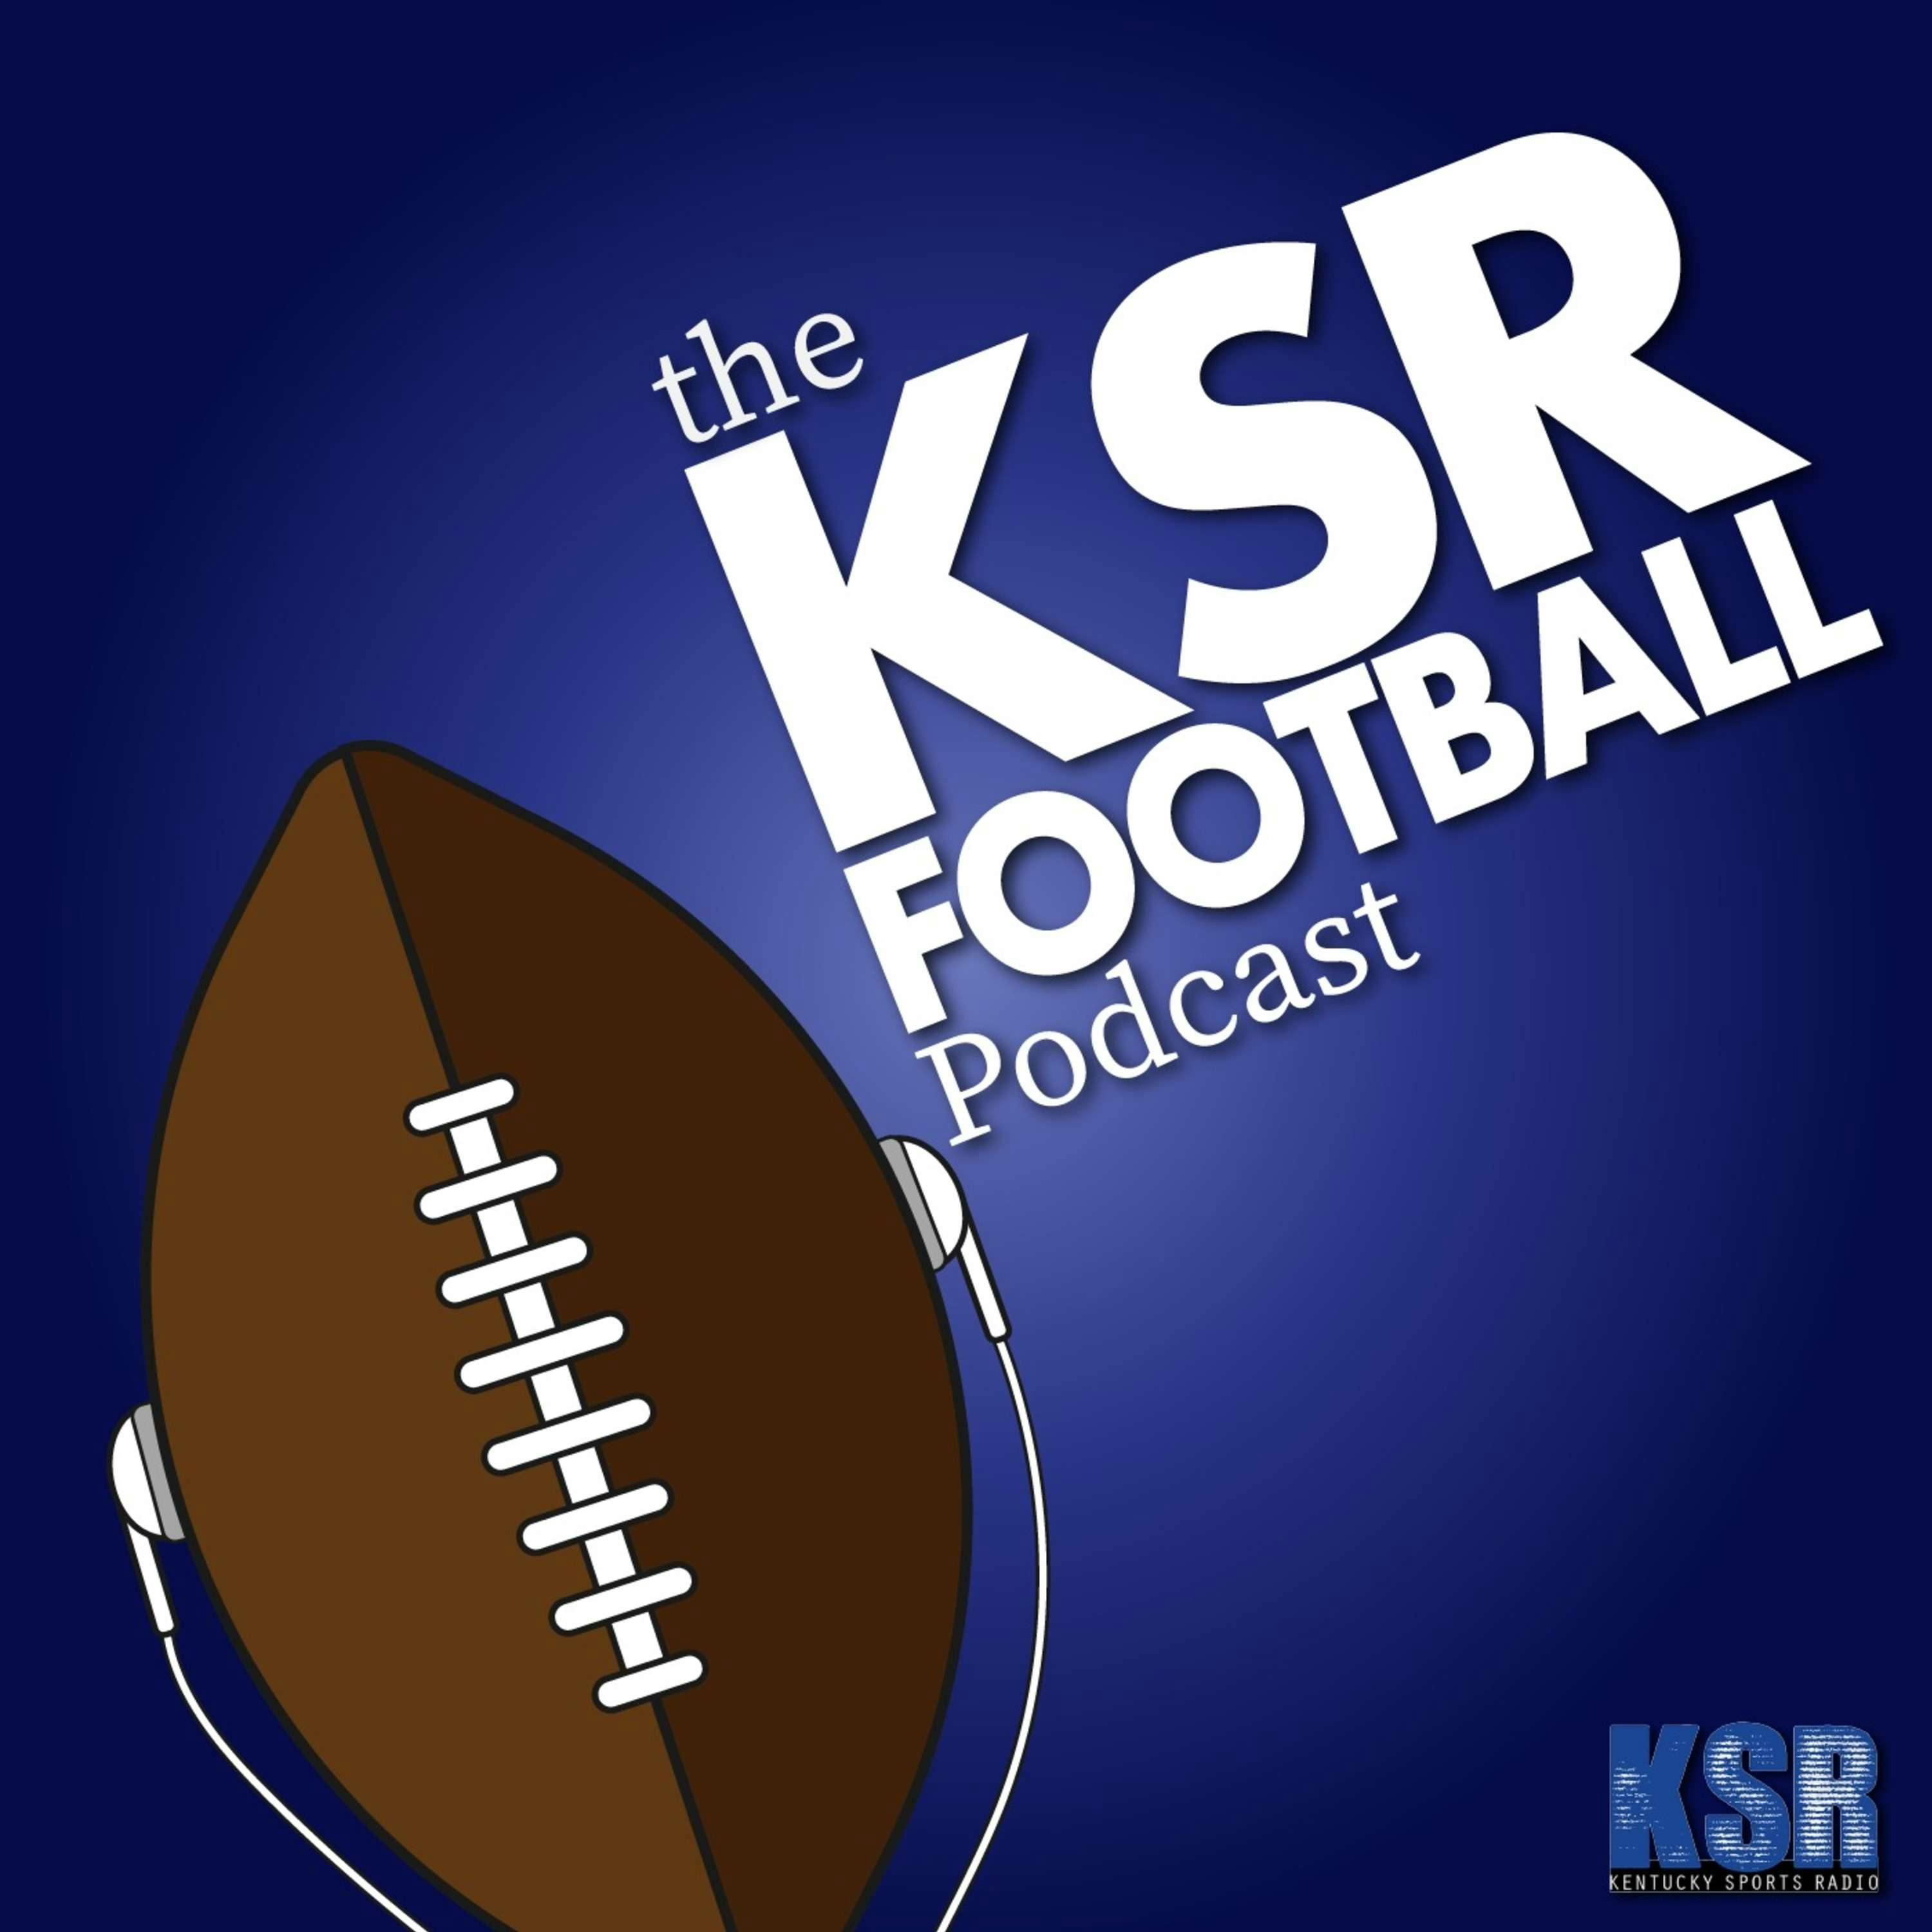 The KSR Football Podcast's Tournament of Kentucky Football Things